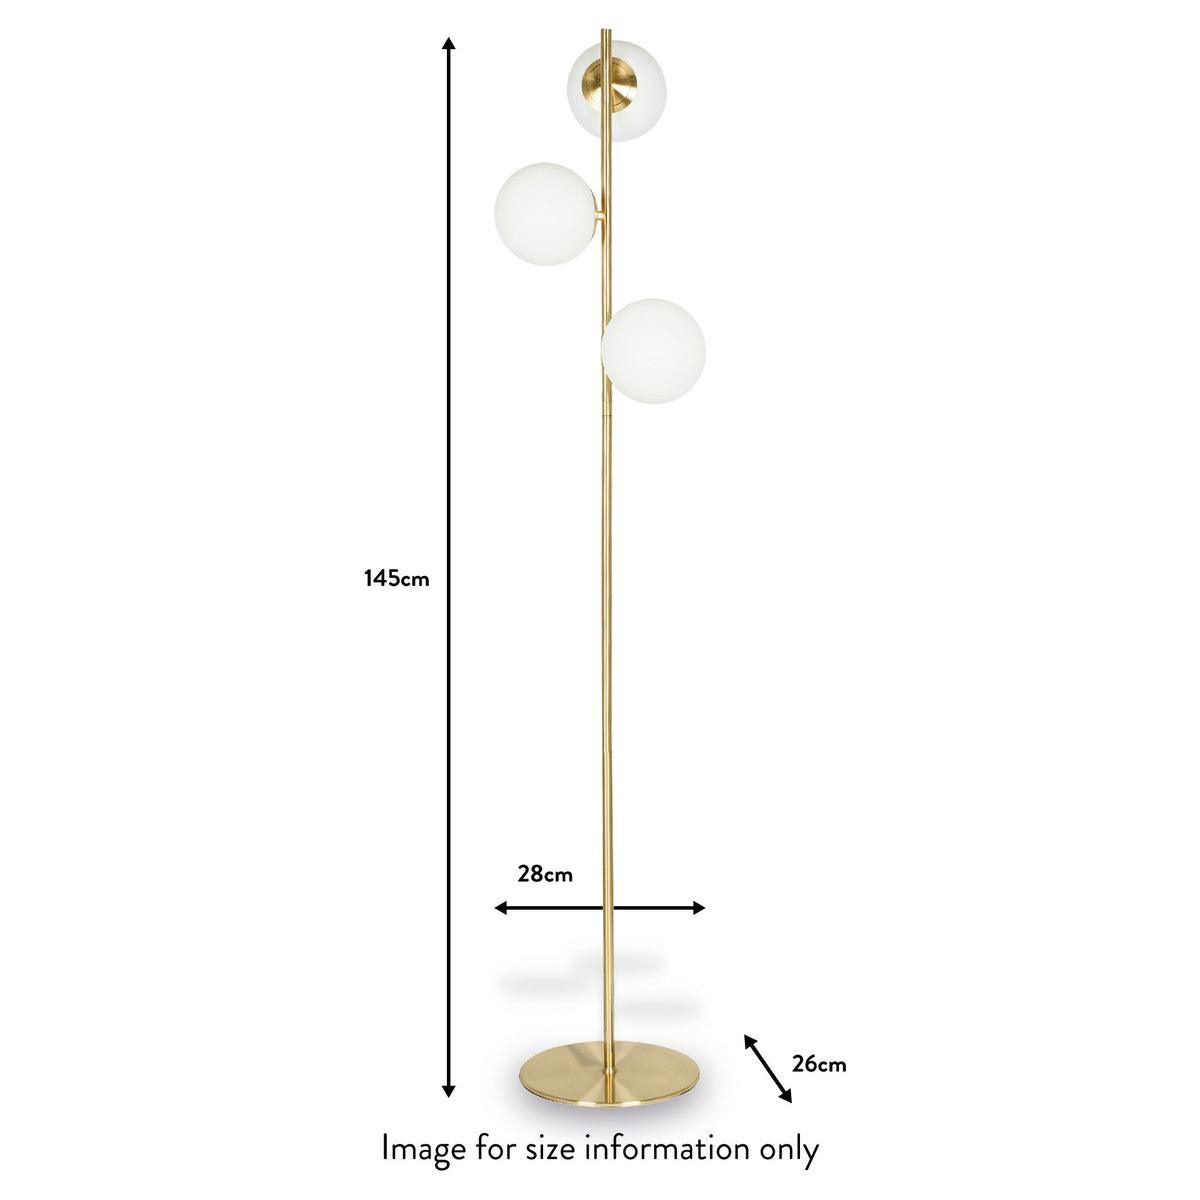 Asterope White Orb and Gold Metal Floor Lamp dimensions